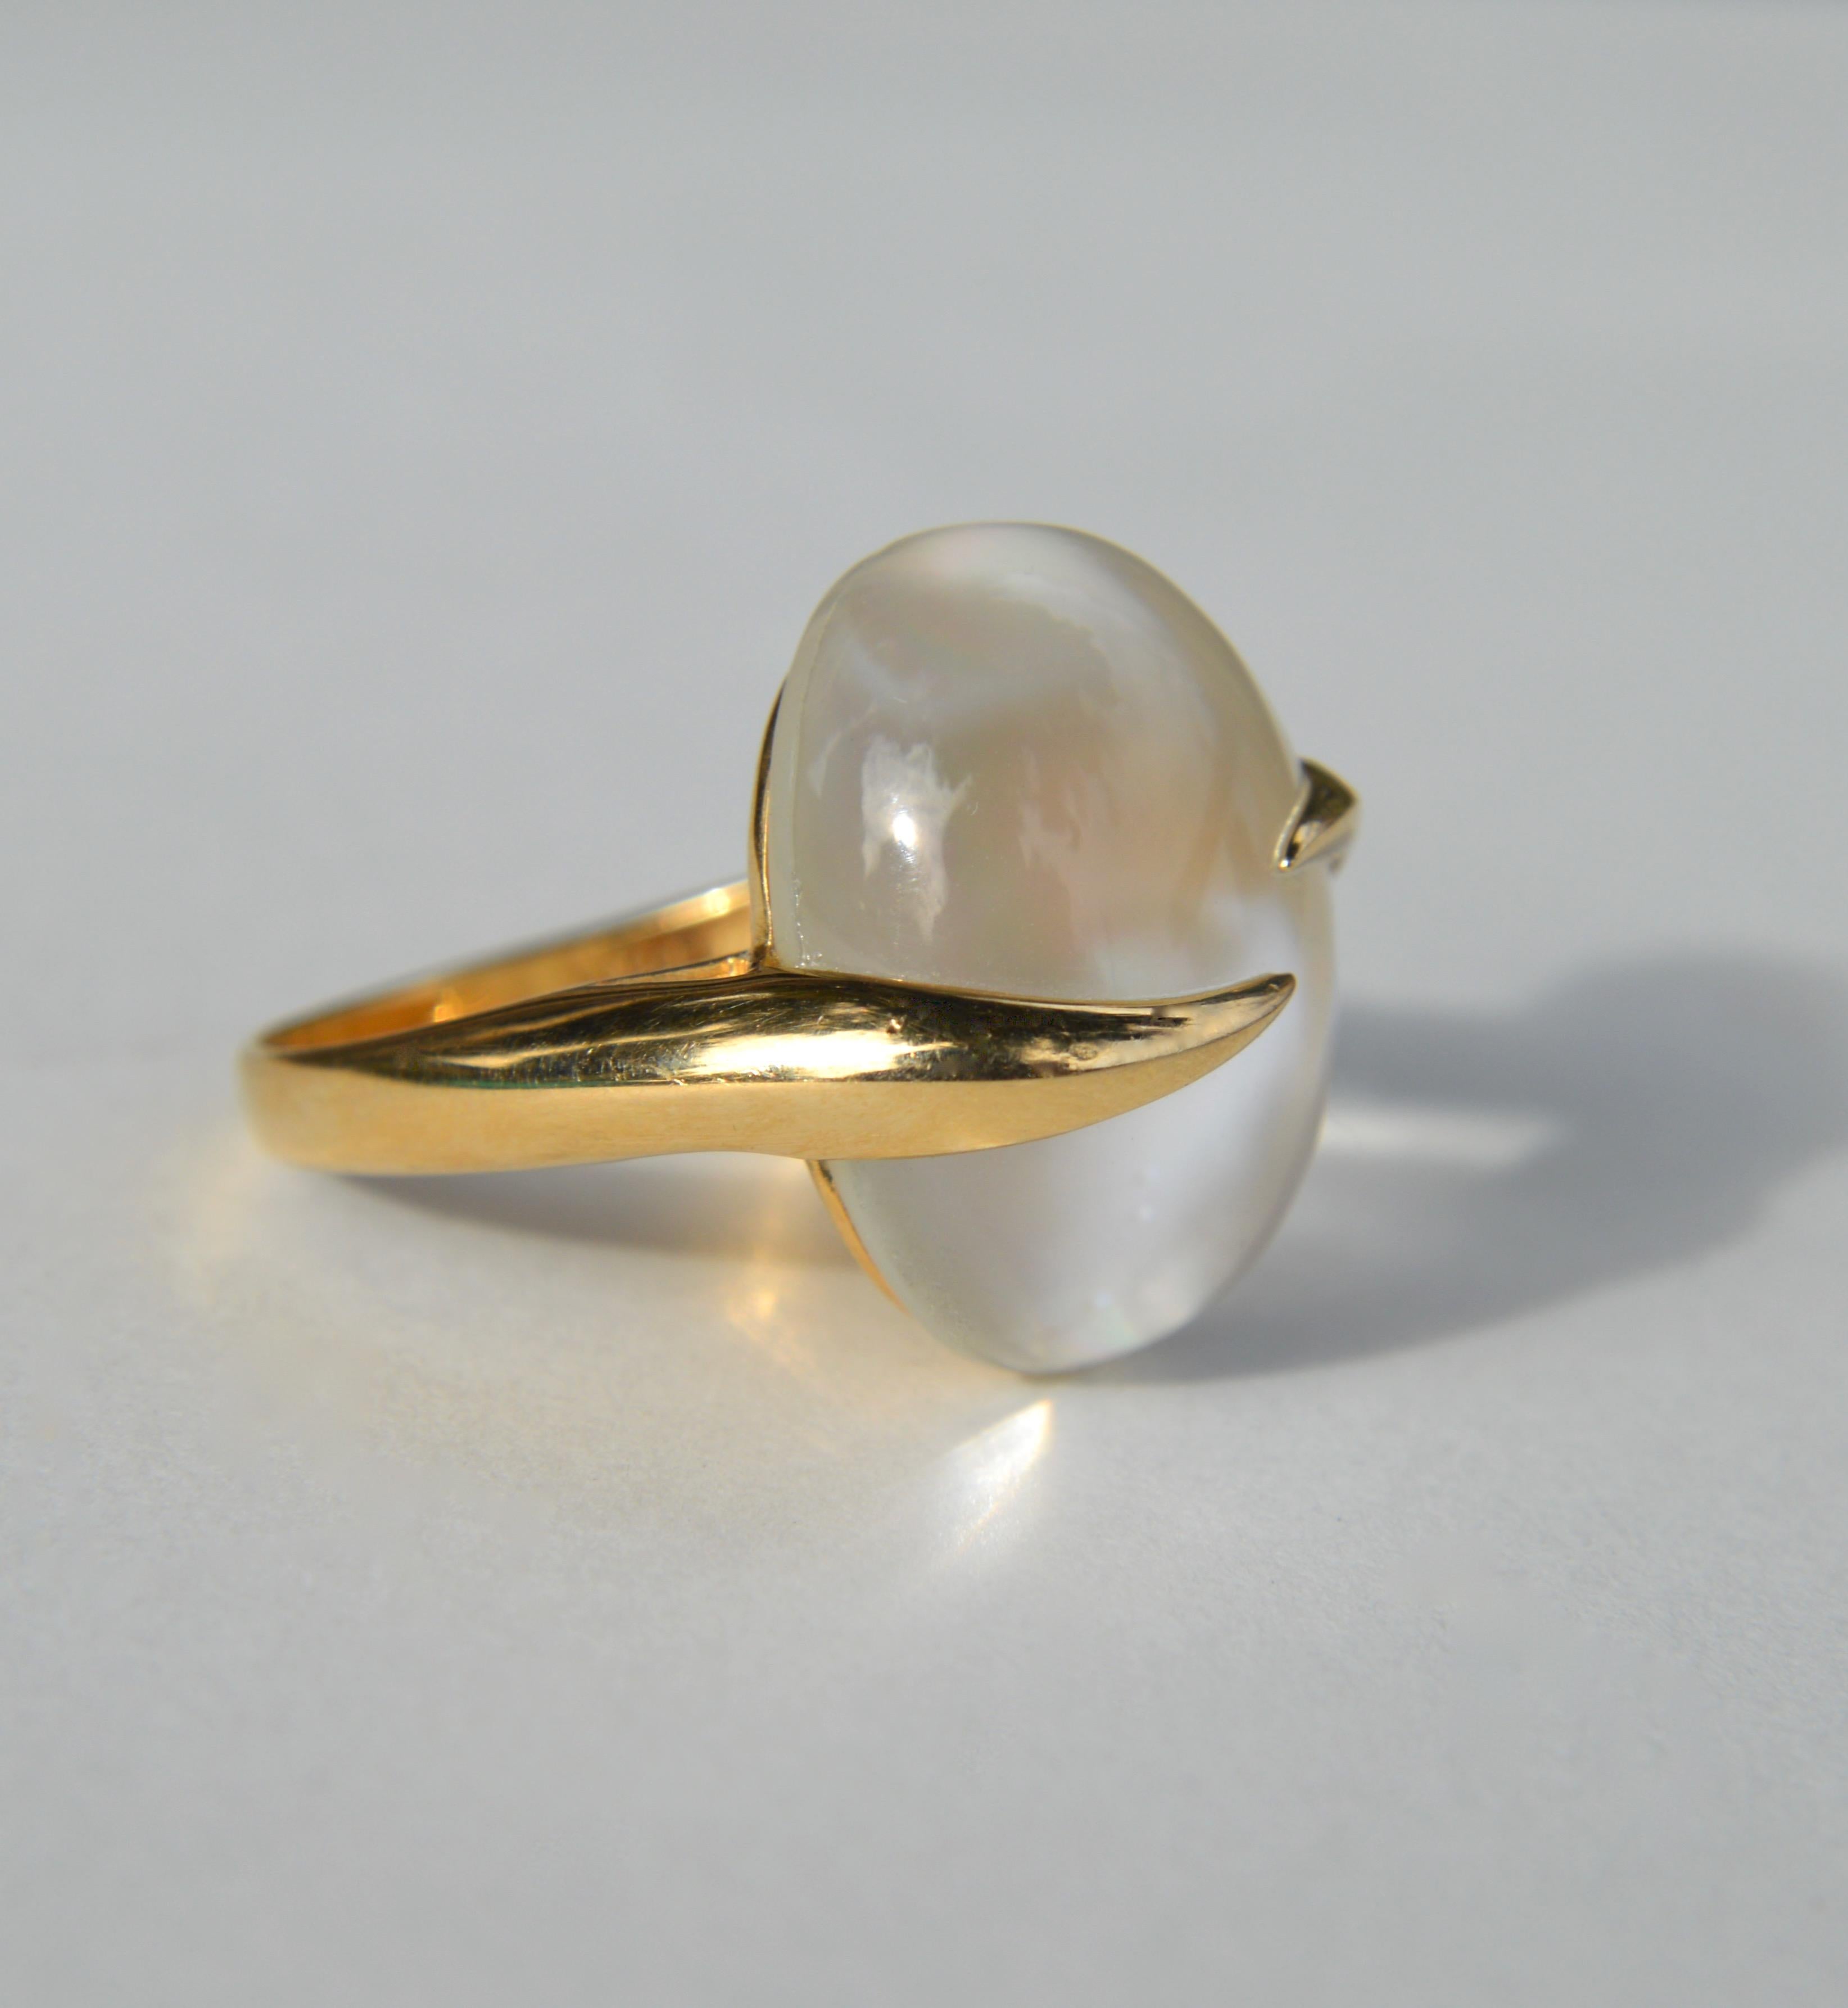 Stunning vintage Tito Pedrini made in Italy 14K yellow gold statement, dinner, cocktail ring featuring an impressive 22 x 17mm clear quartz crystal and mother of pearl doublet cabochon. Marked as 14K, made in Italy. In very good condition. Size 8,